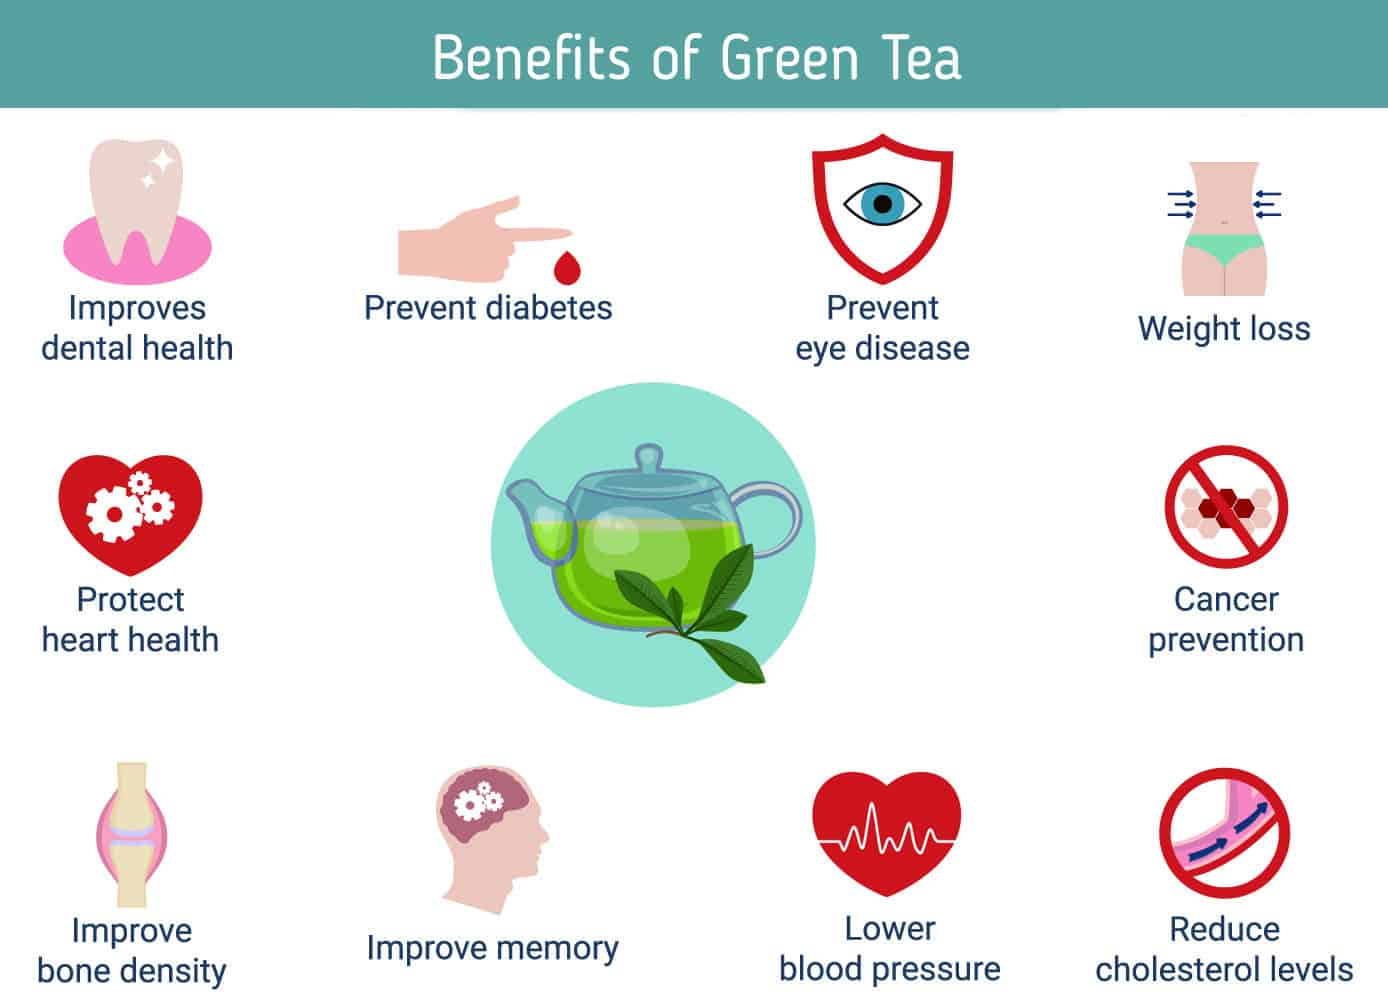 the benefits of green tea (and side effects) - liquid image